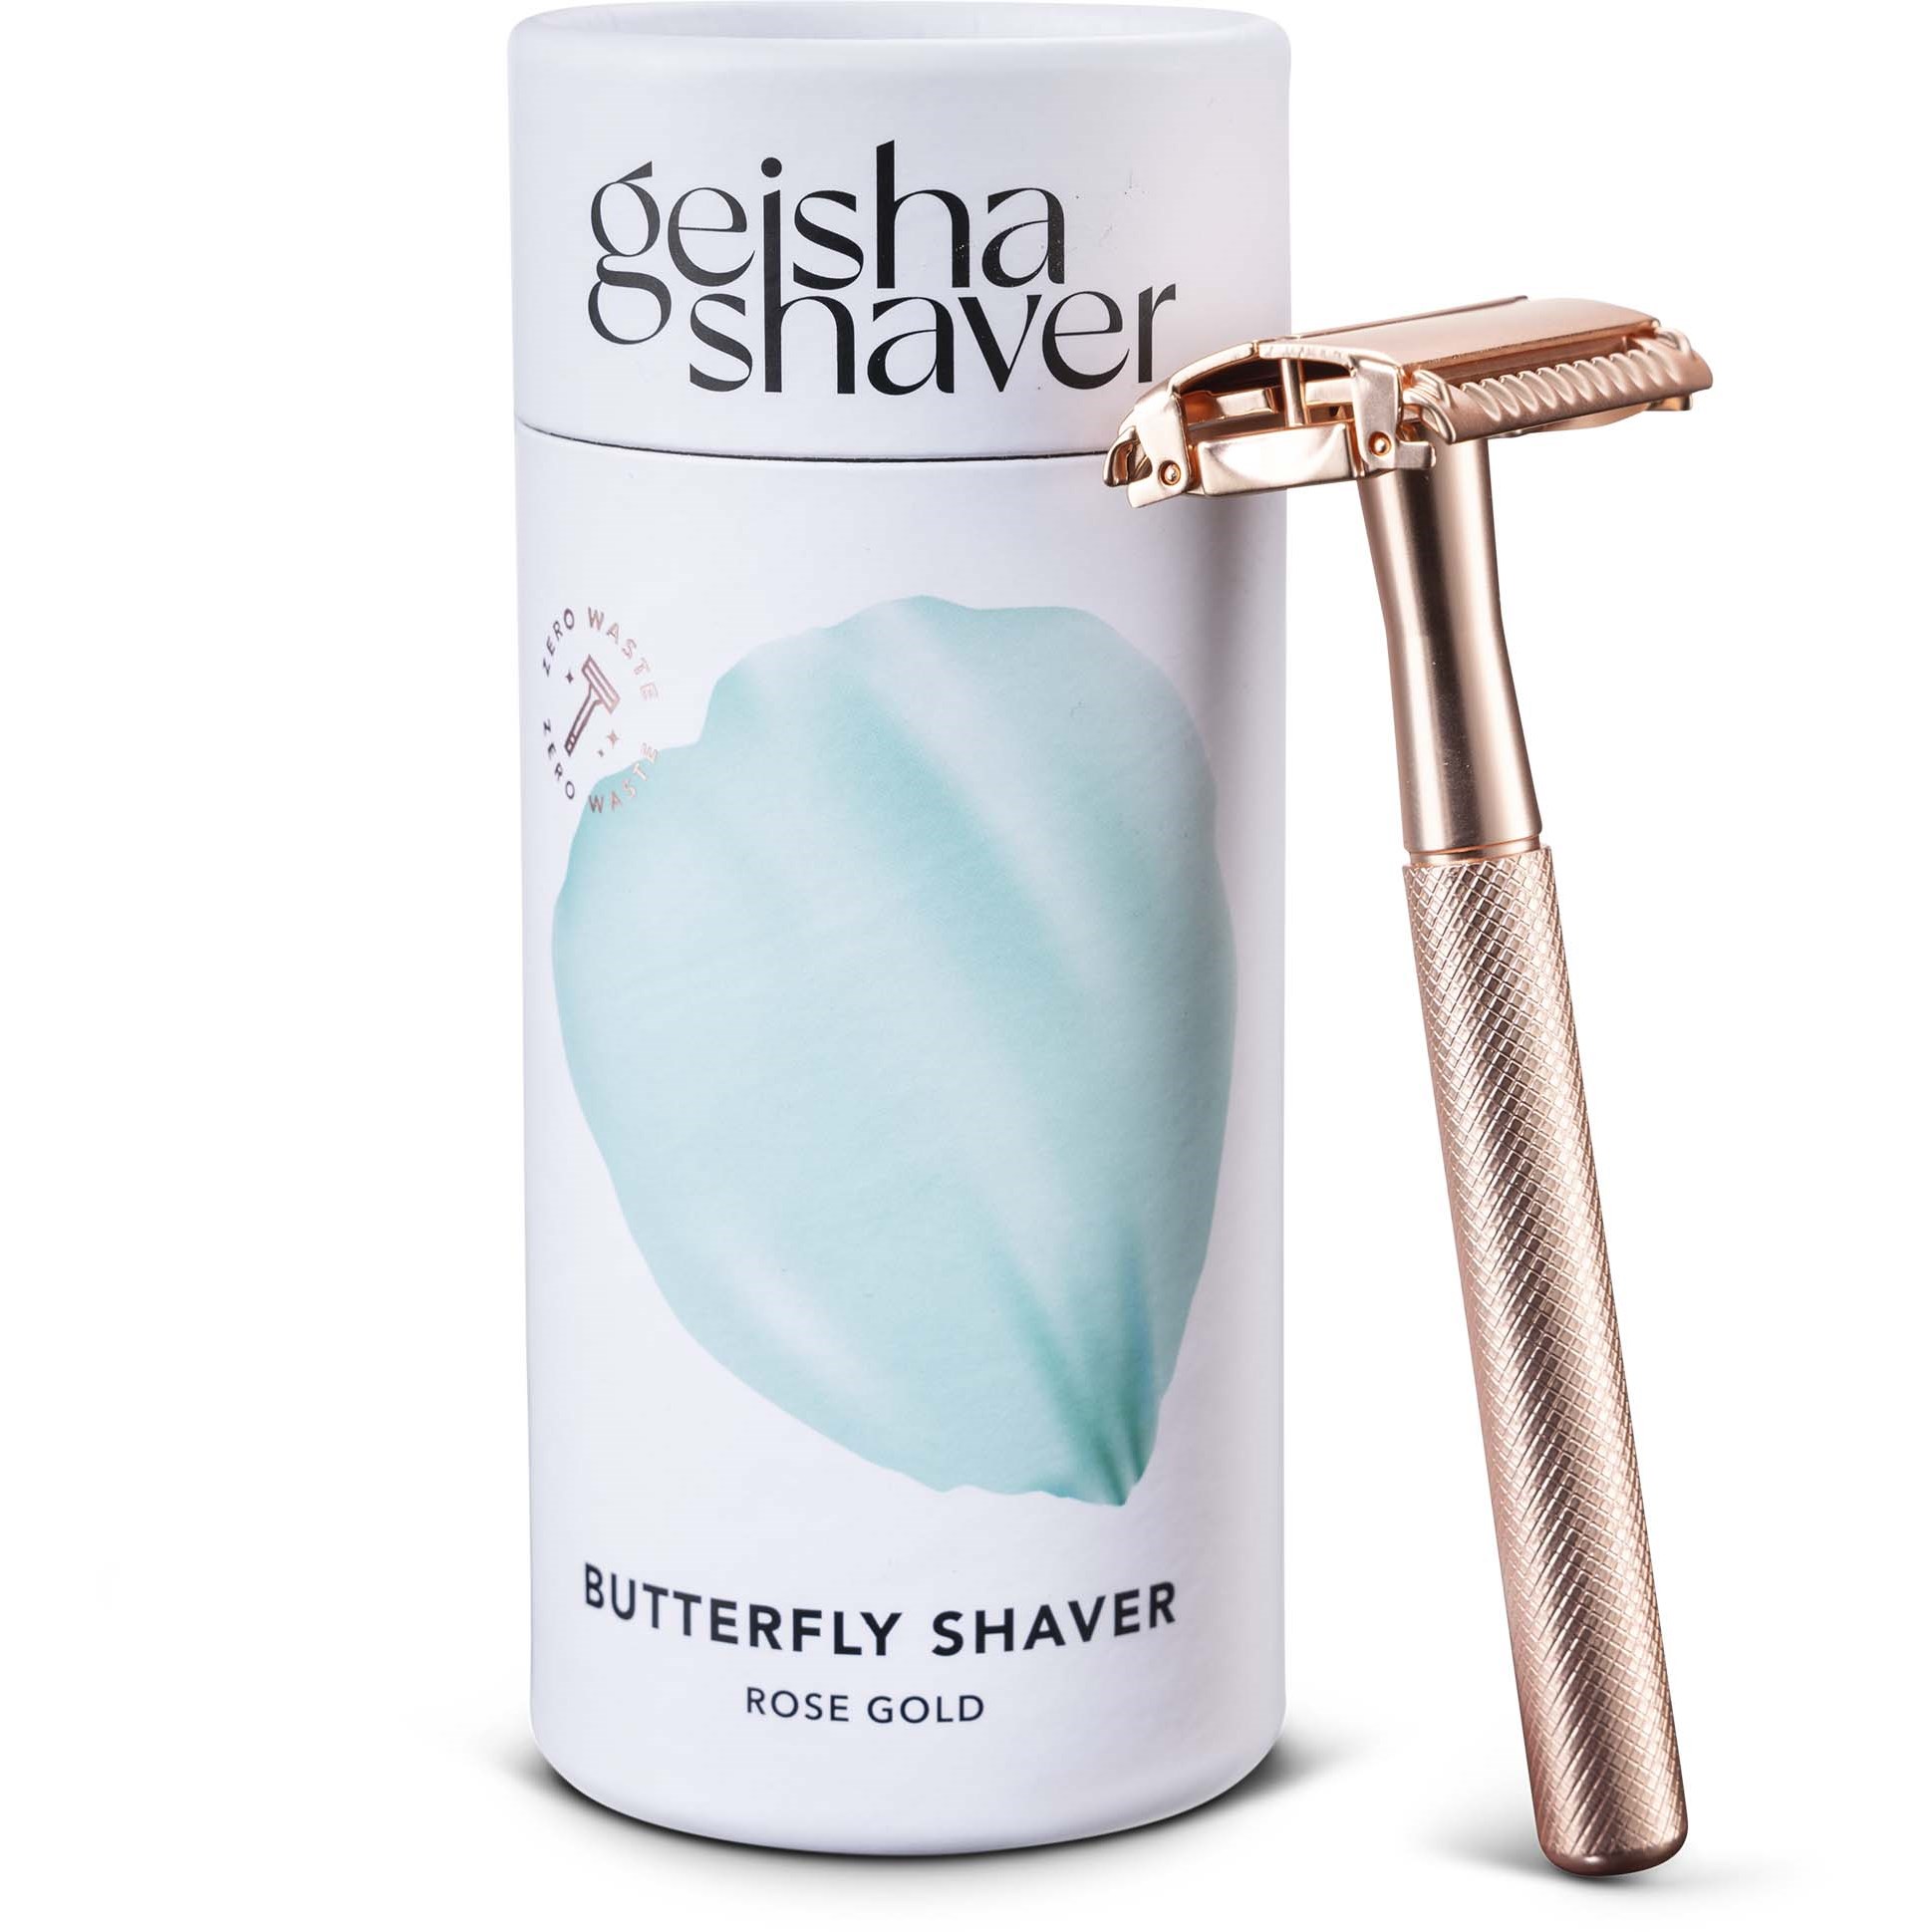 Geisha Shaver Shaver Butterfly